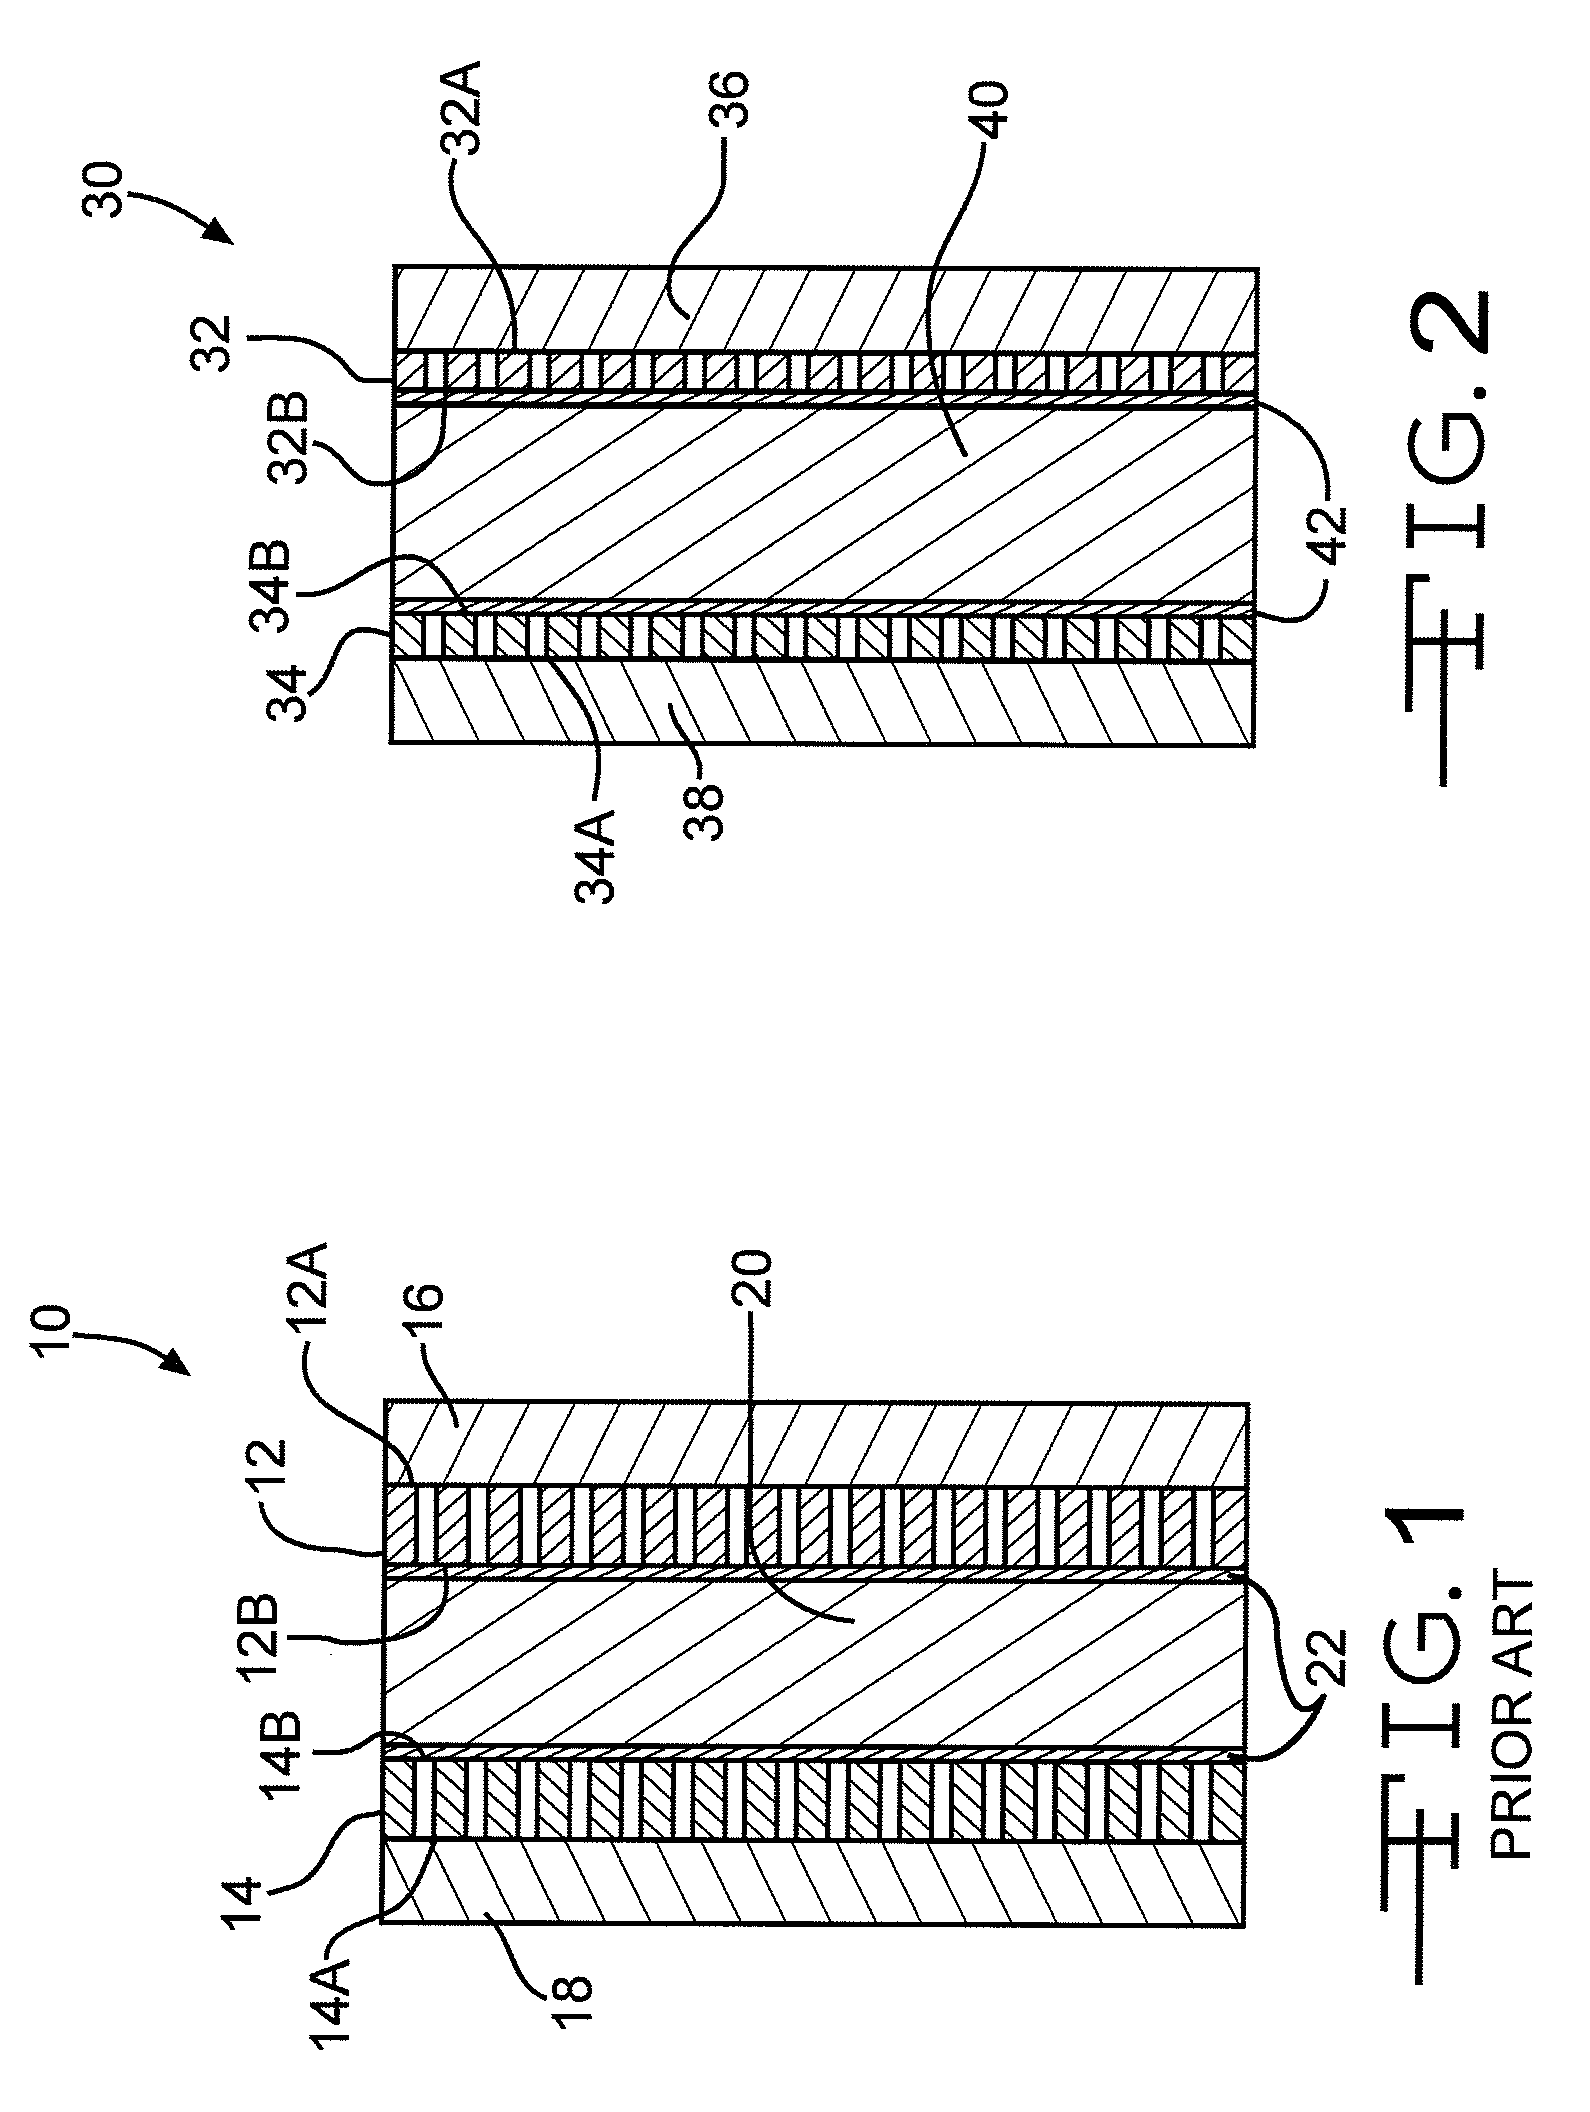 Sandwich electrode design having relatively thin current collectors